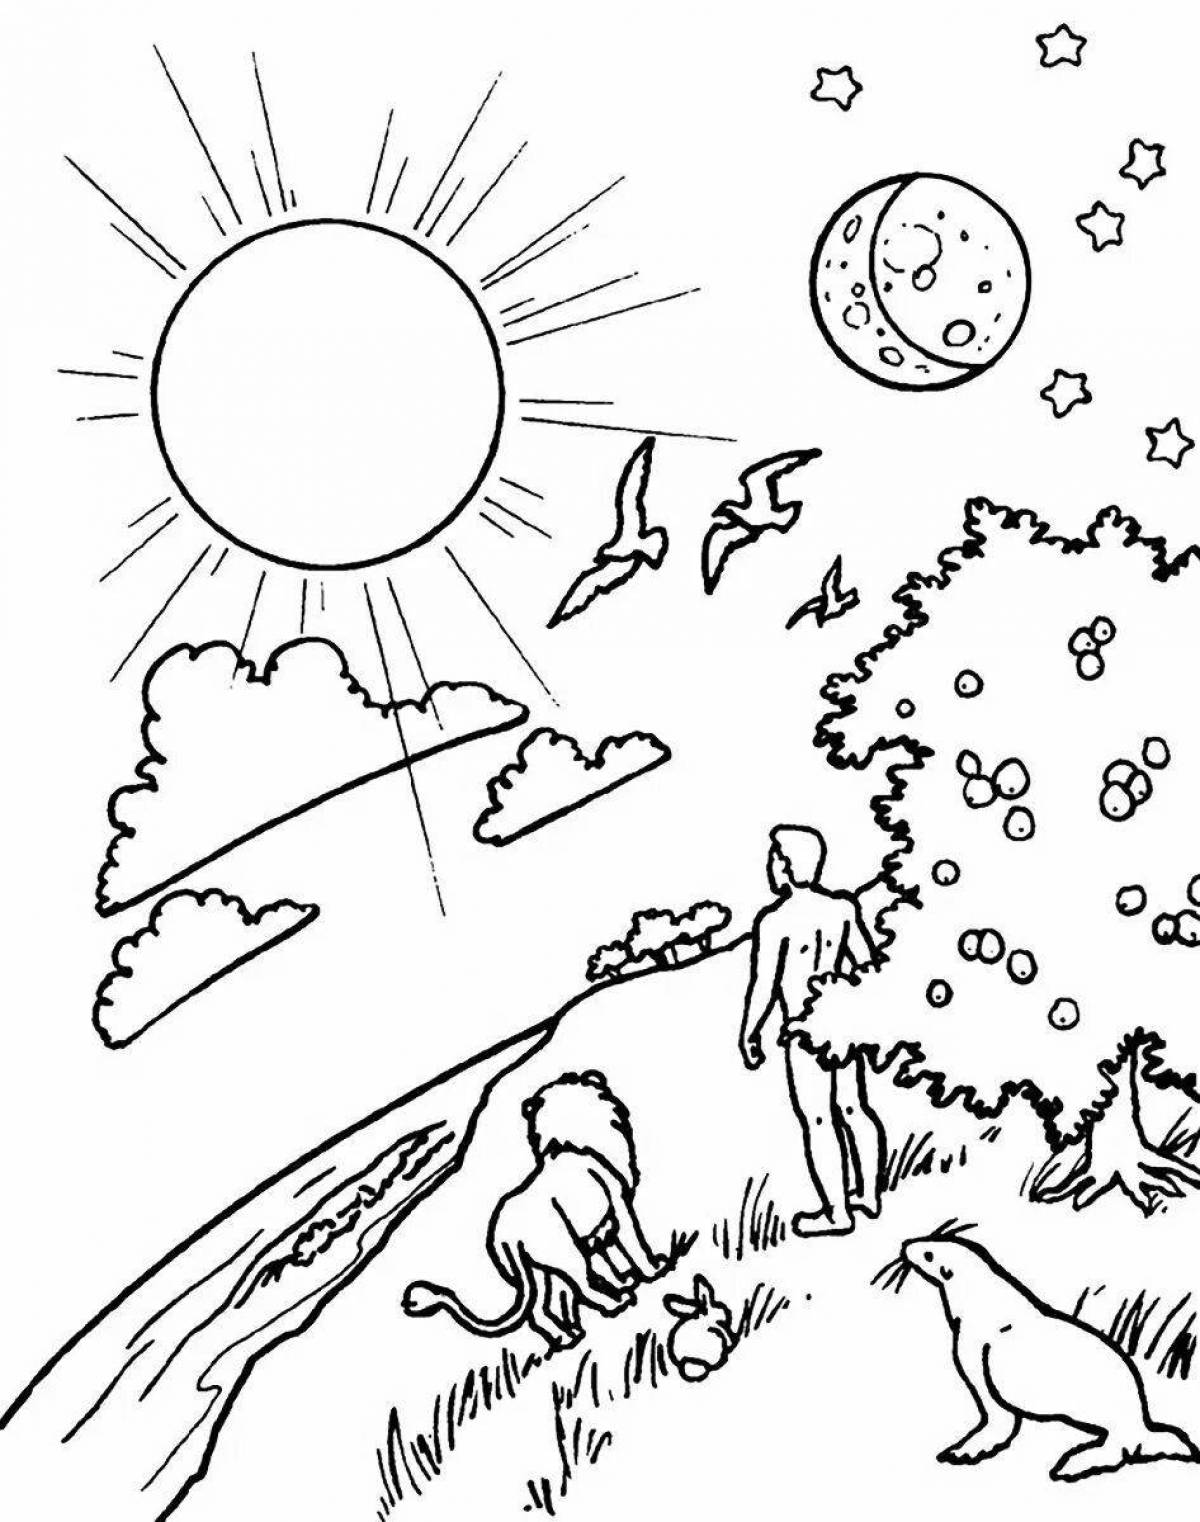 Coloring page amazing creation of the world